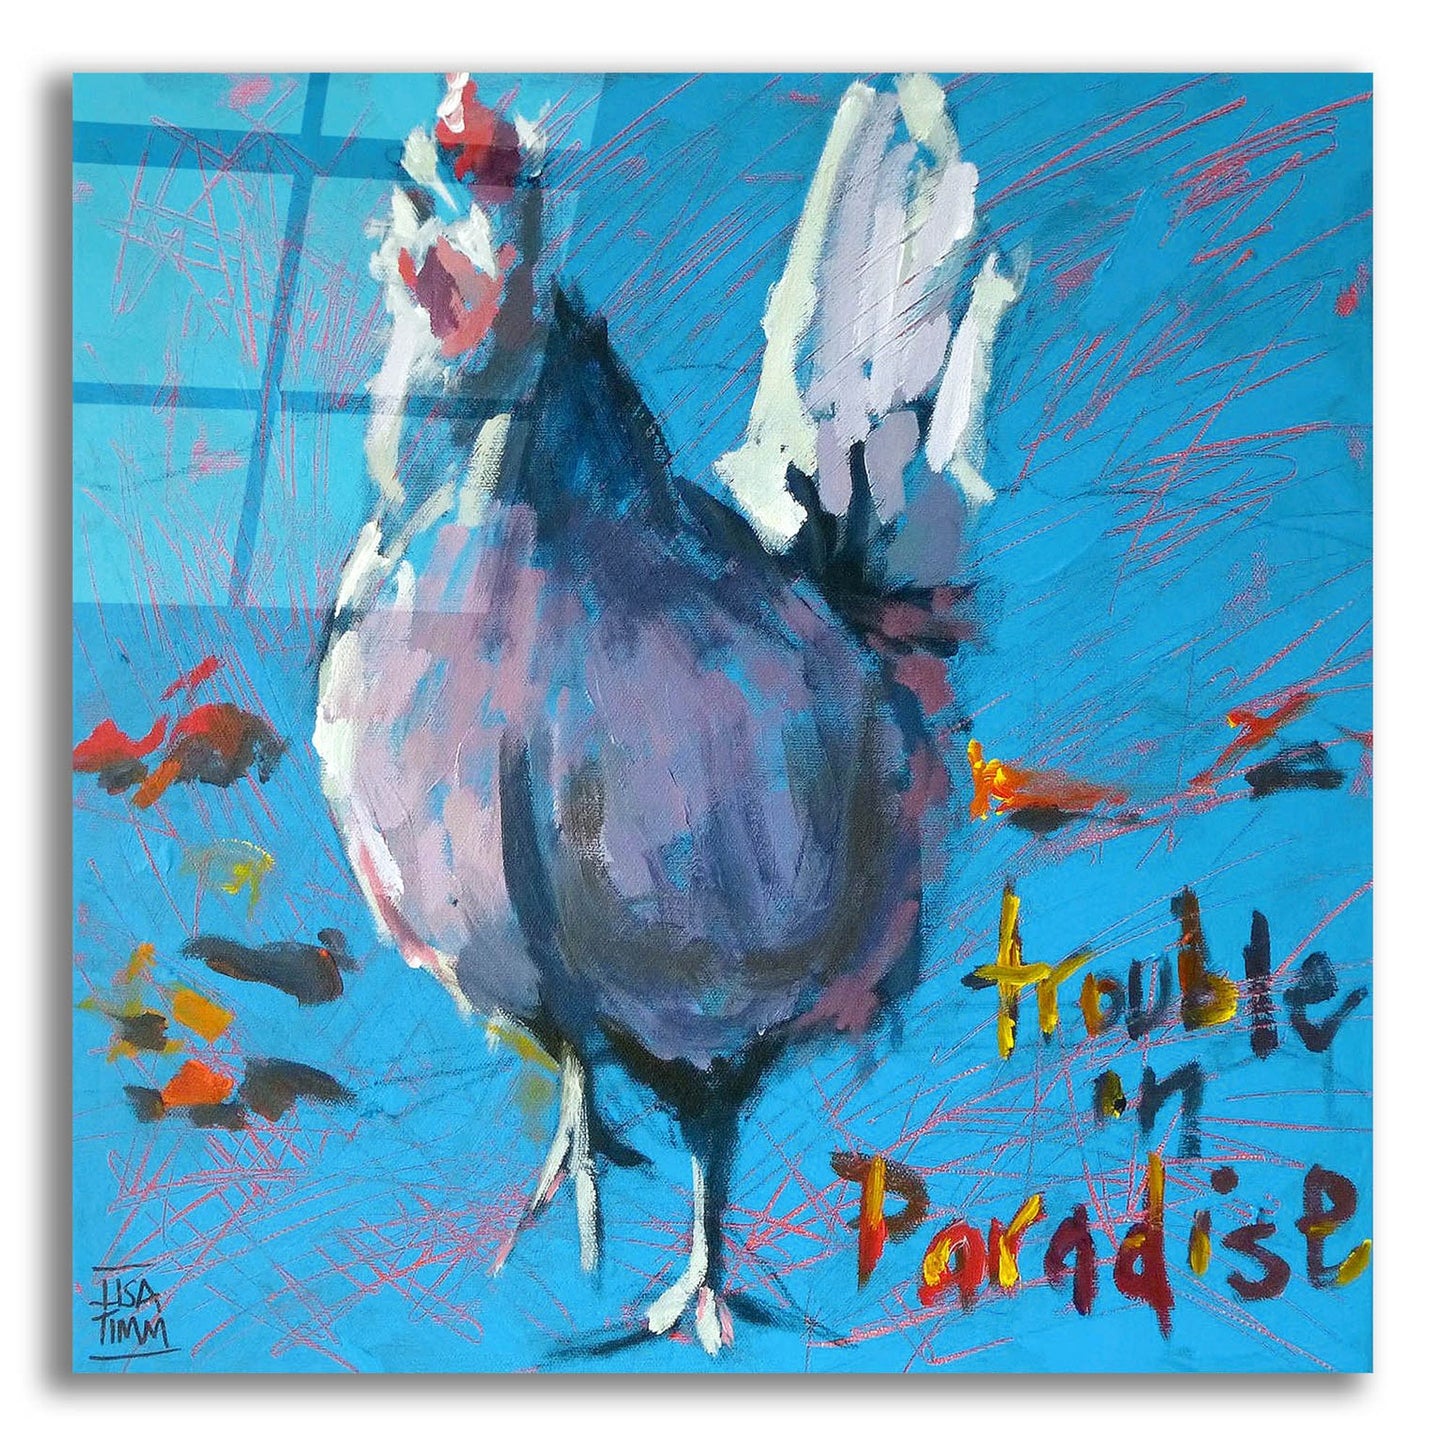 Epic Art 'Trouble In Paradise' by Lisa Timmerman, Acrylic Glass Wall Art